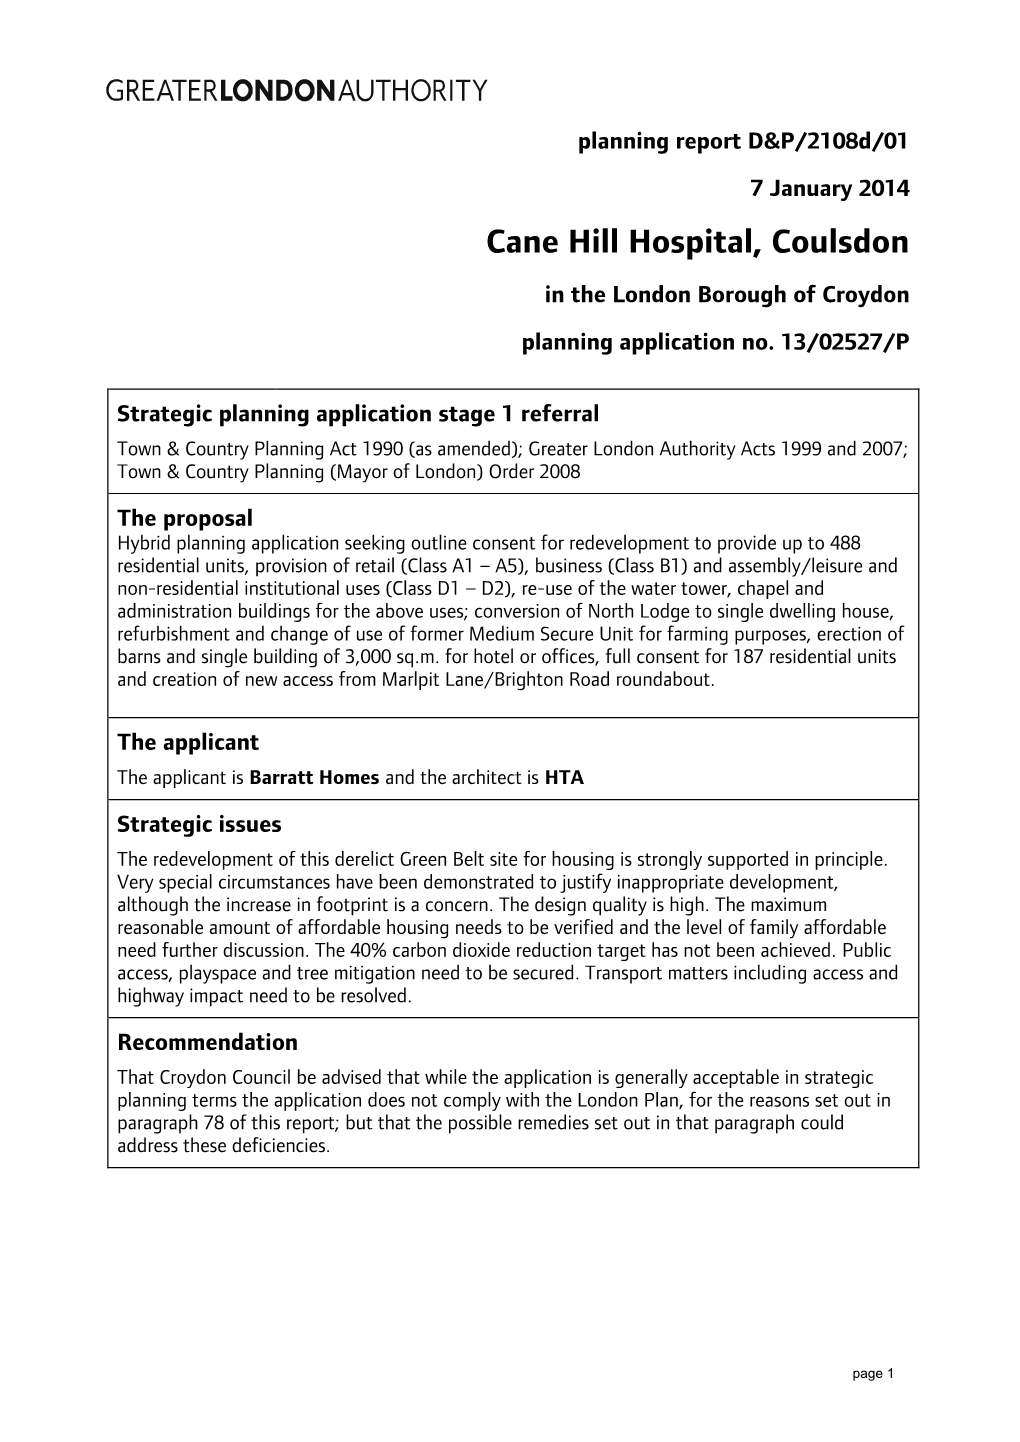 Cane Hill Hospital, Coulsdon in the London Borough of Croydon Planning Application No